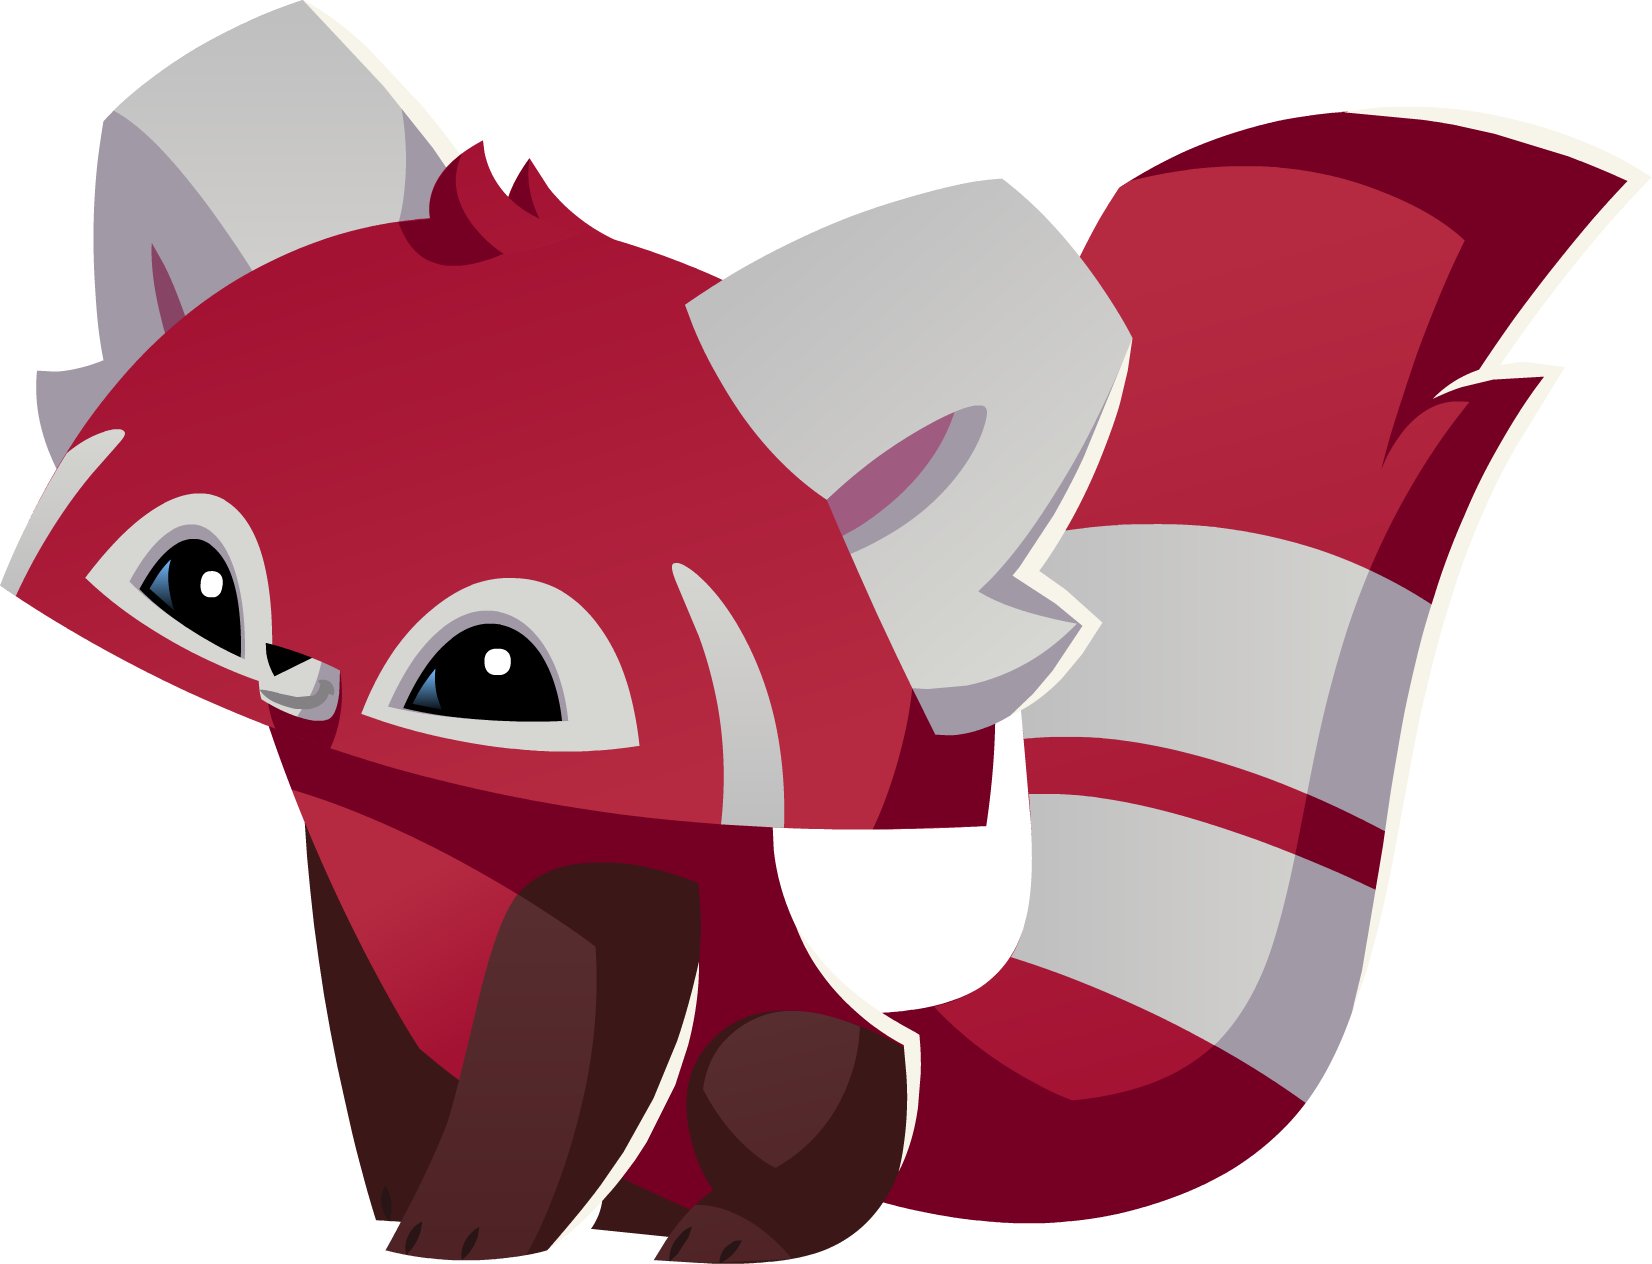 Download Image - Red panda graphic.png | Animal Jam Wiki | FANDOM powered by Wikia